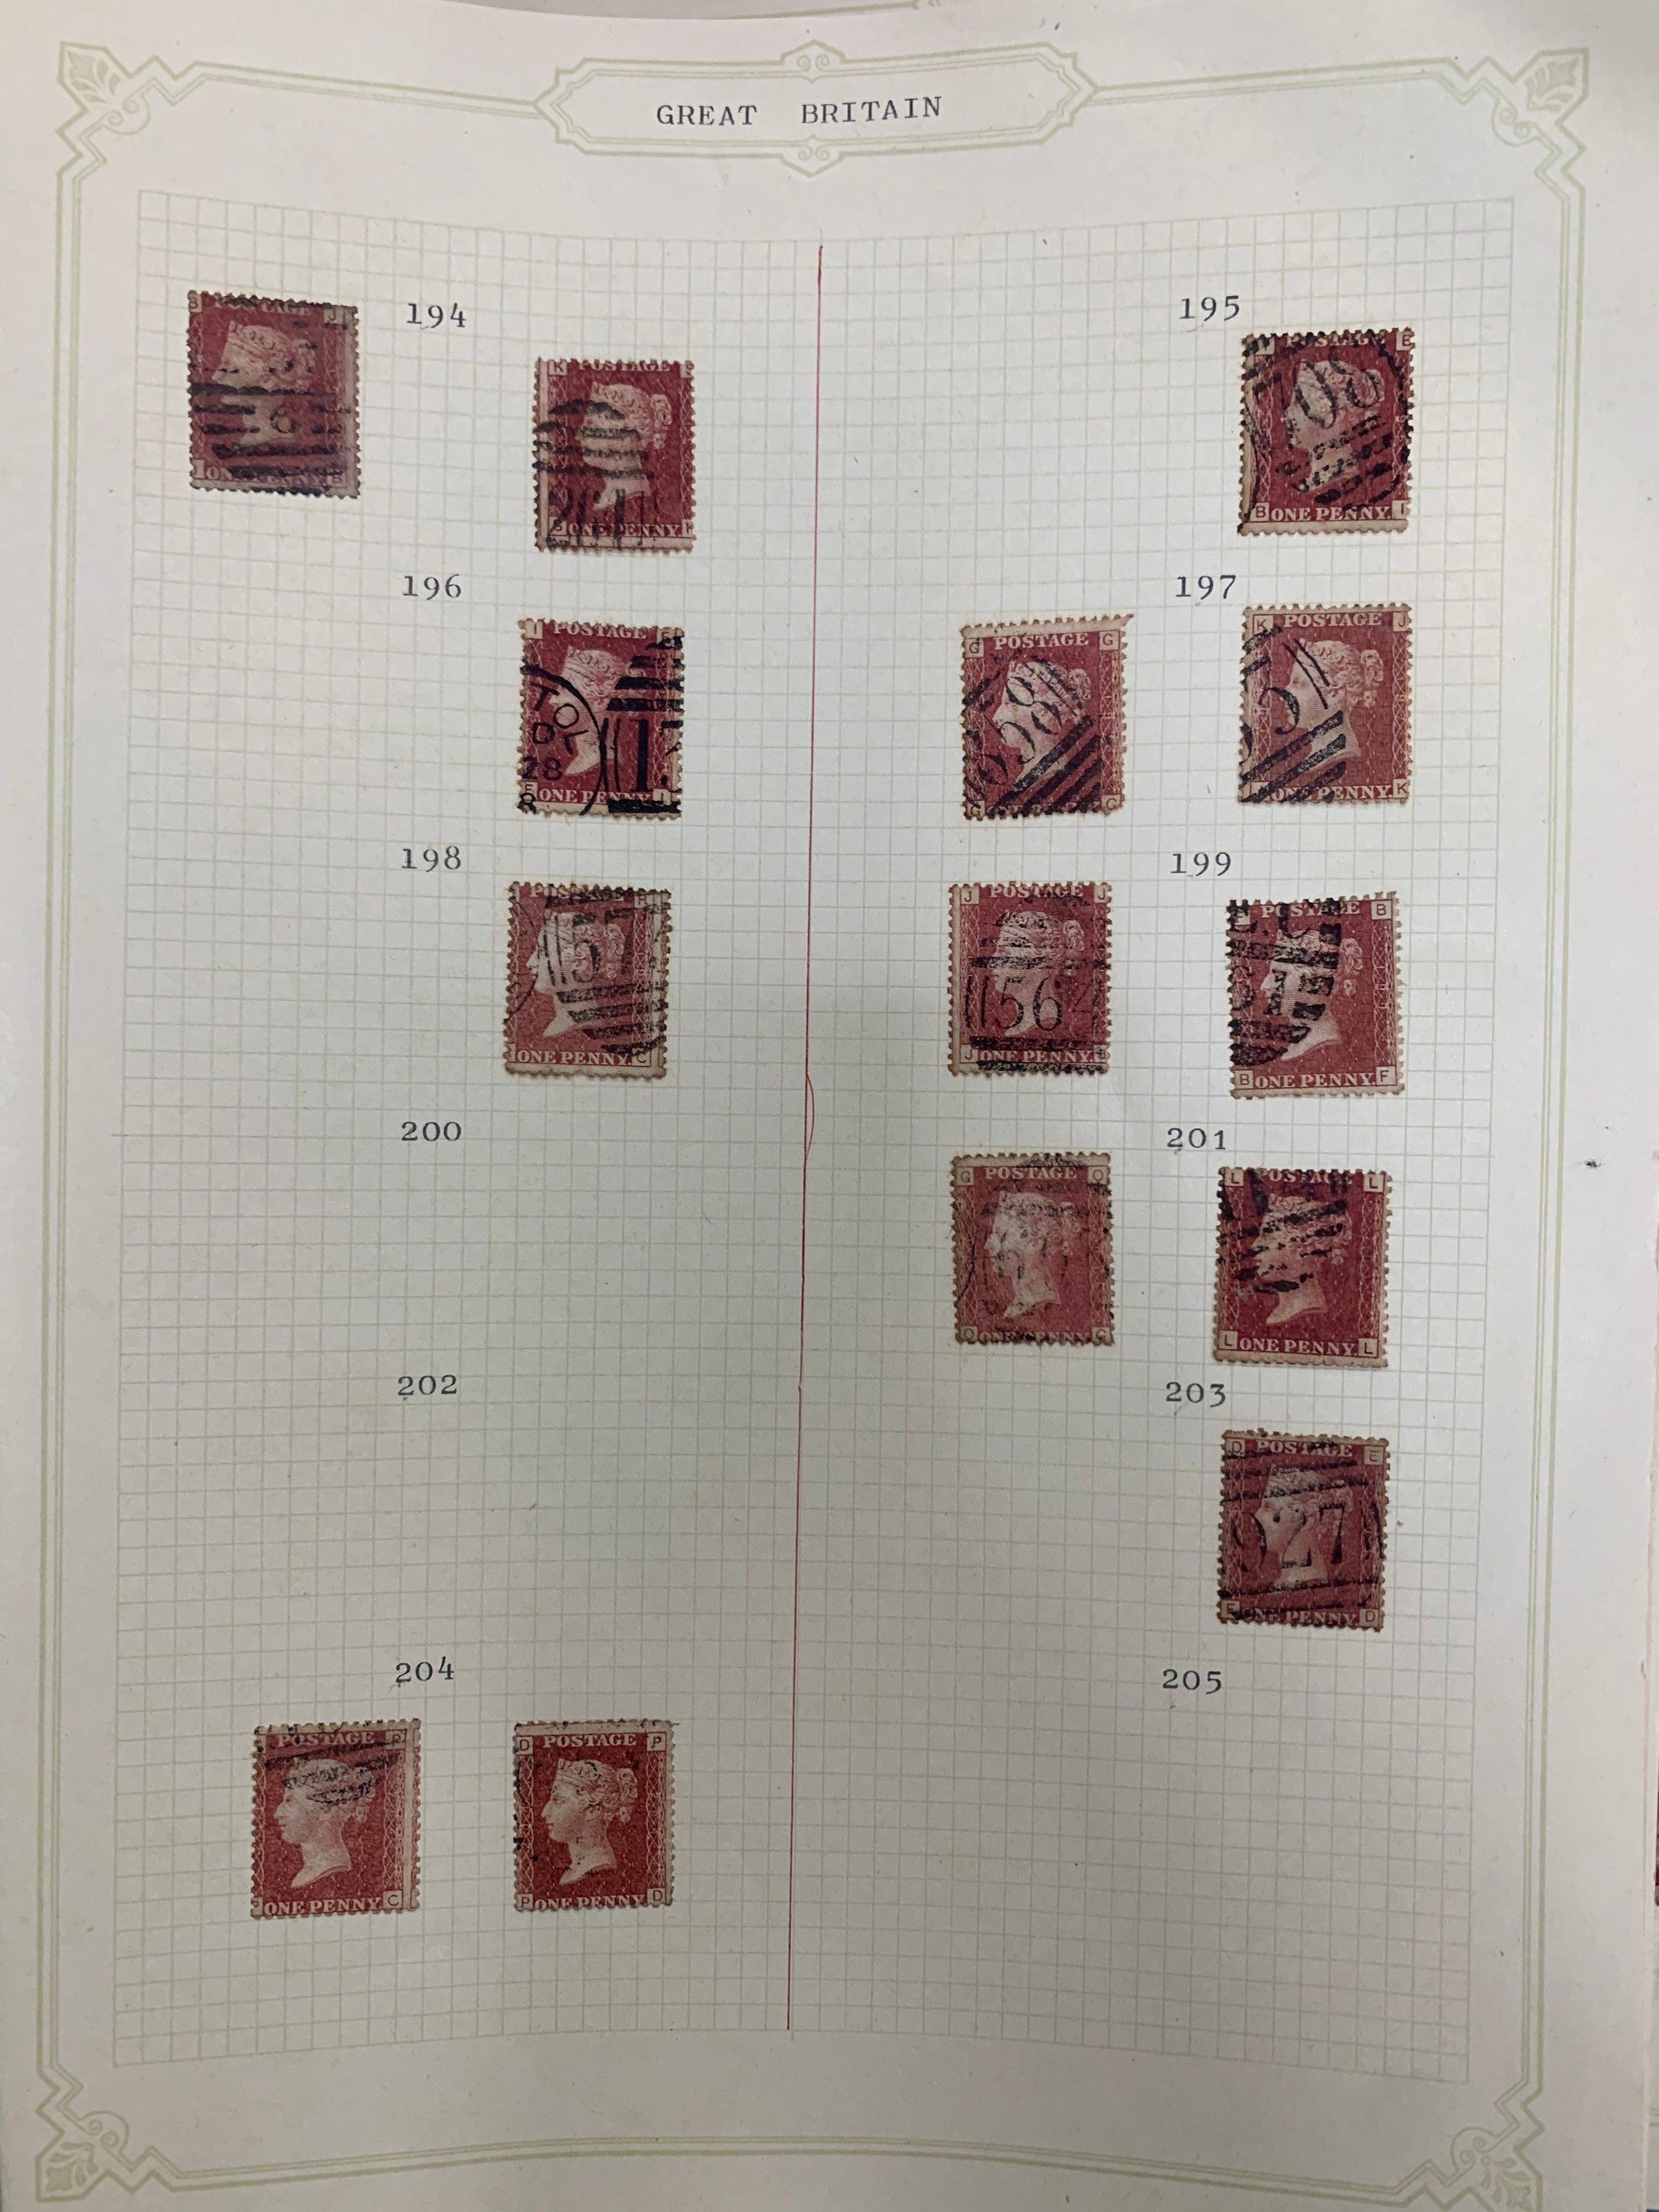 Great Britain, 1858-64 annotated and well-laid out collection of 1d Penny Reds FU from plate 73 to - Image 10 of 12